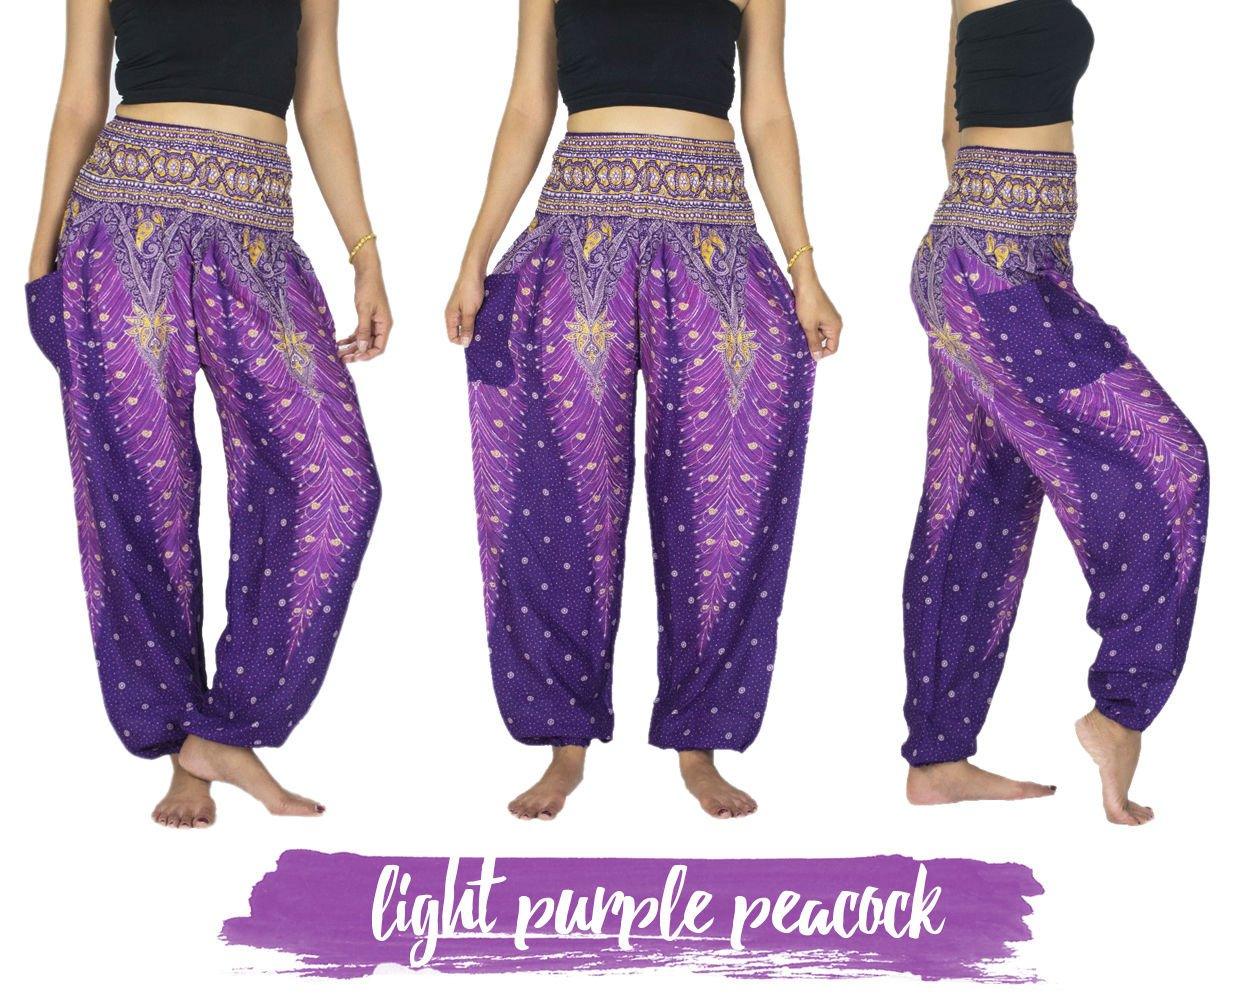 Soft Rayon Peacock Trouser, African High waist women light pant - VirtuousWares:Global